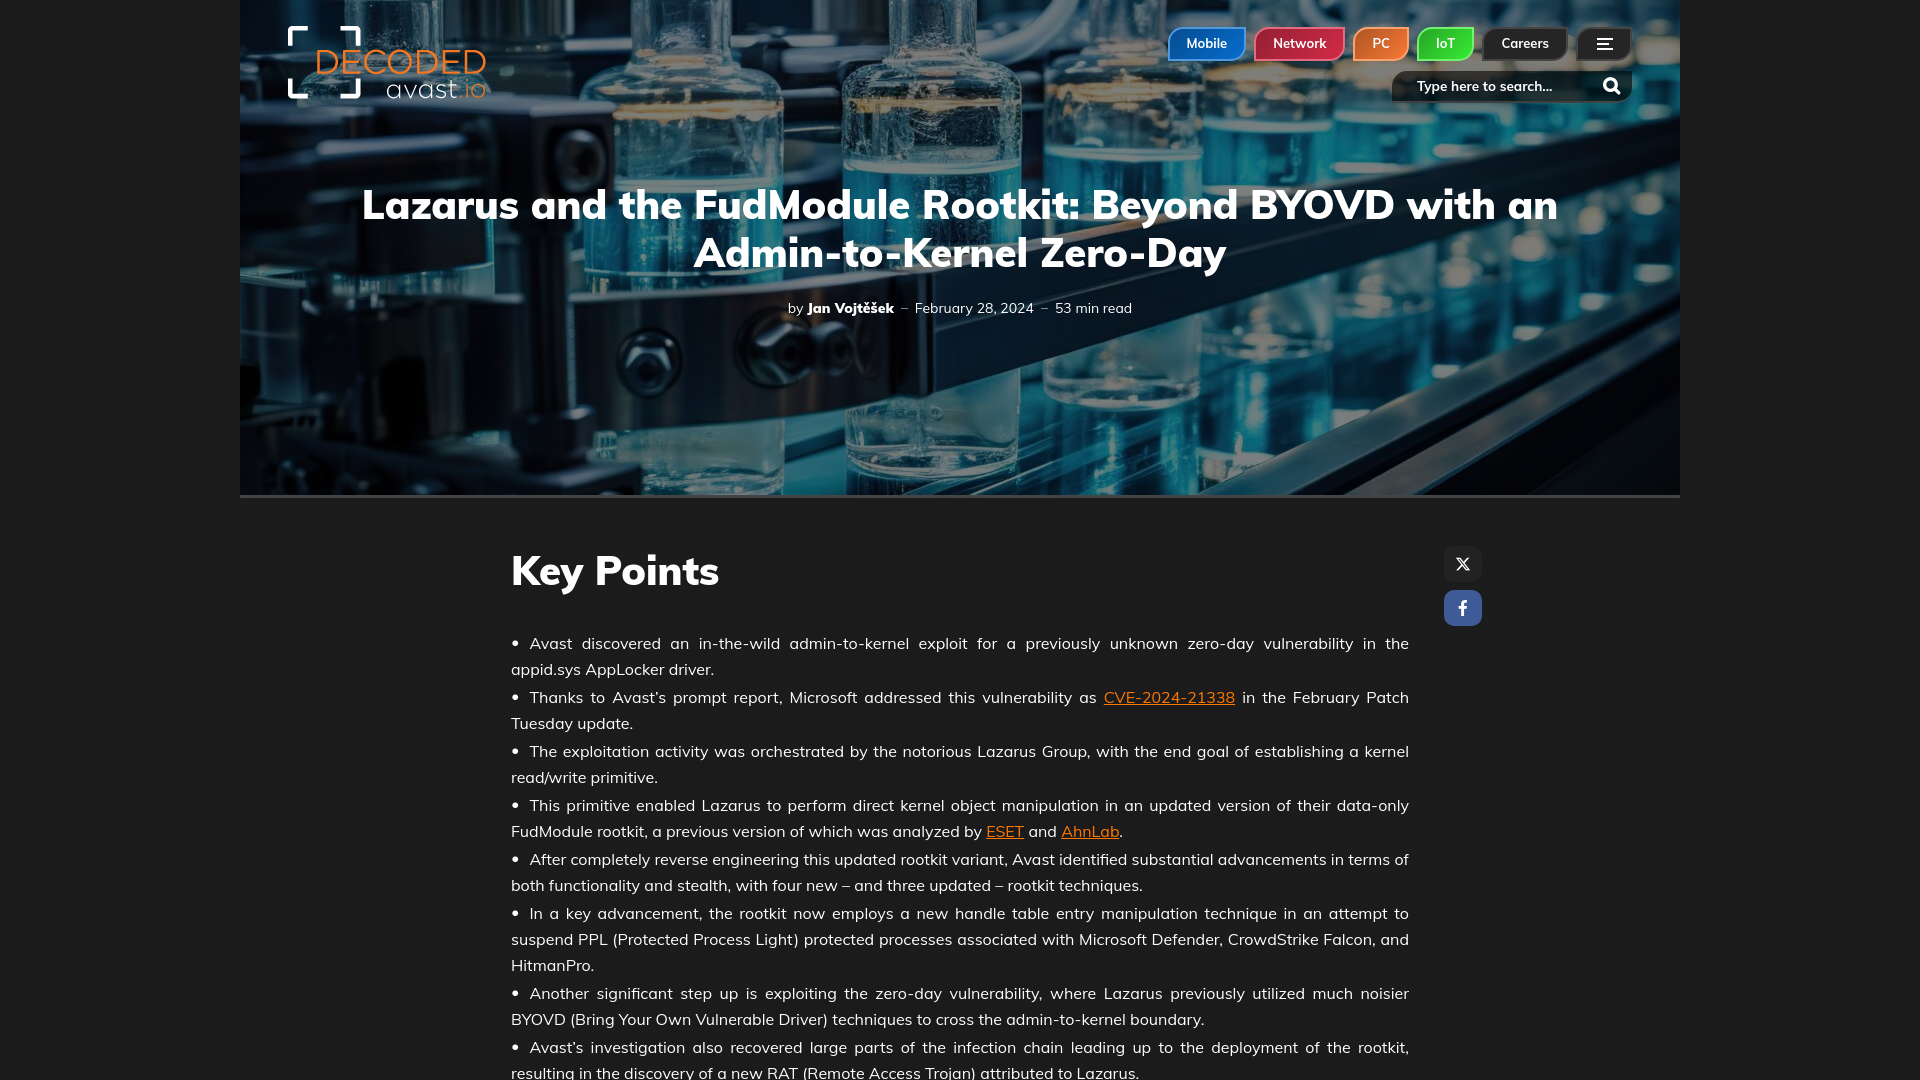 Lazarus and the FudModule Rootkit: Beyond BYOVD with an Admin-to-Kernel Zero-Day - Avast Threat Labs